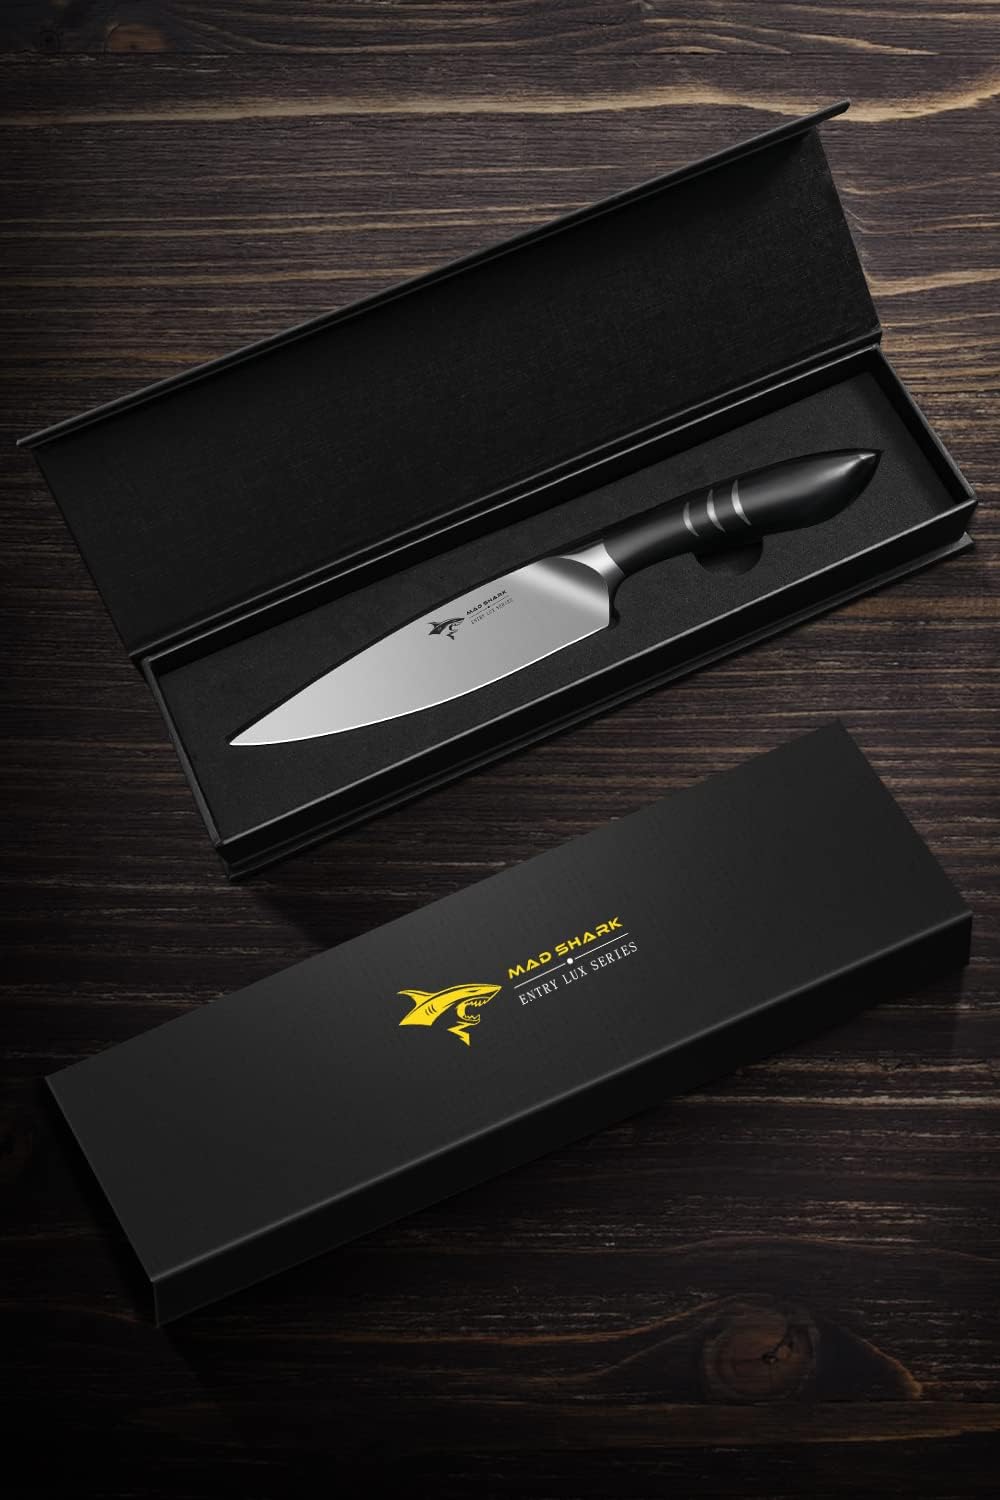 KD 5" Paring Kitchen Knife German Stainless Steel with Give Box